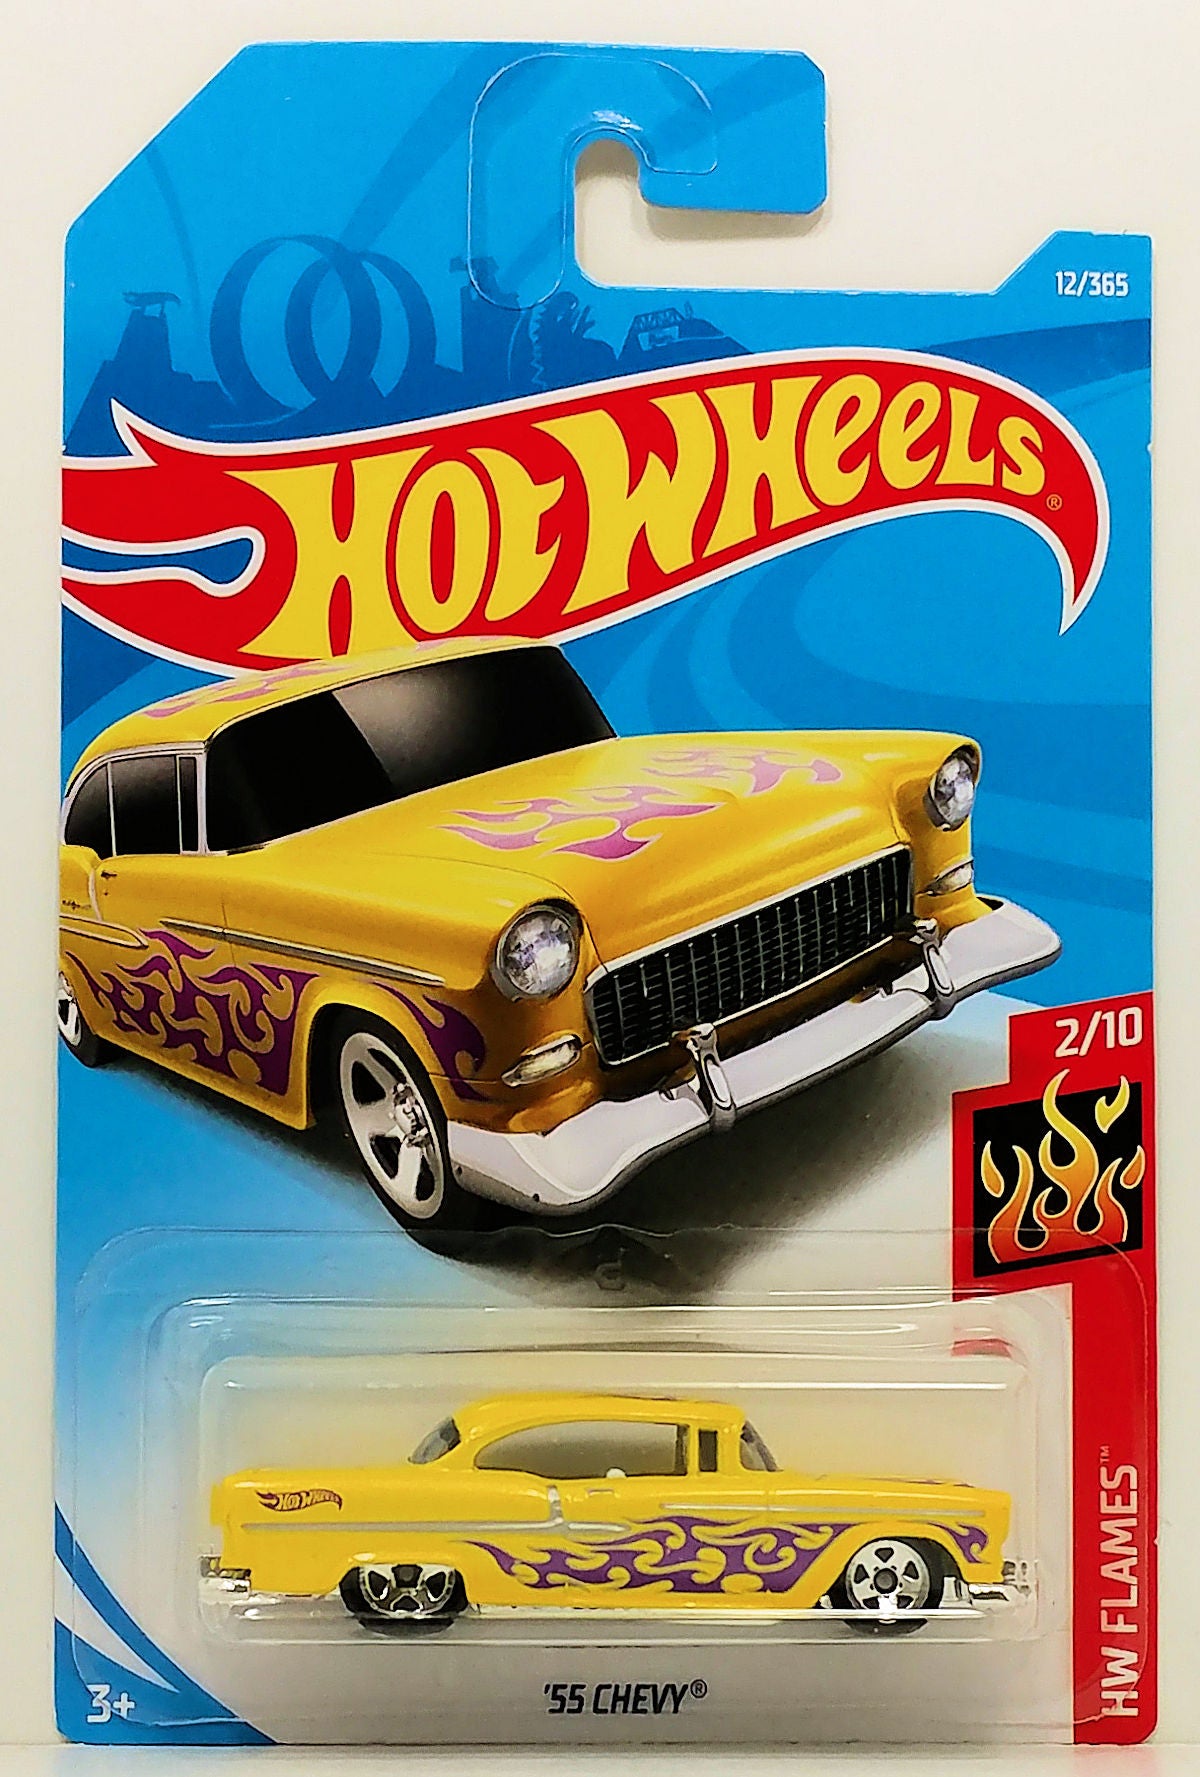 Hot Wheels 2018 - Collector # 012/365 - HW Flames 2/10 -'55 Chevy - Yellow - IC